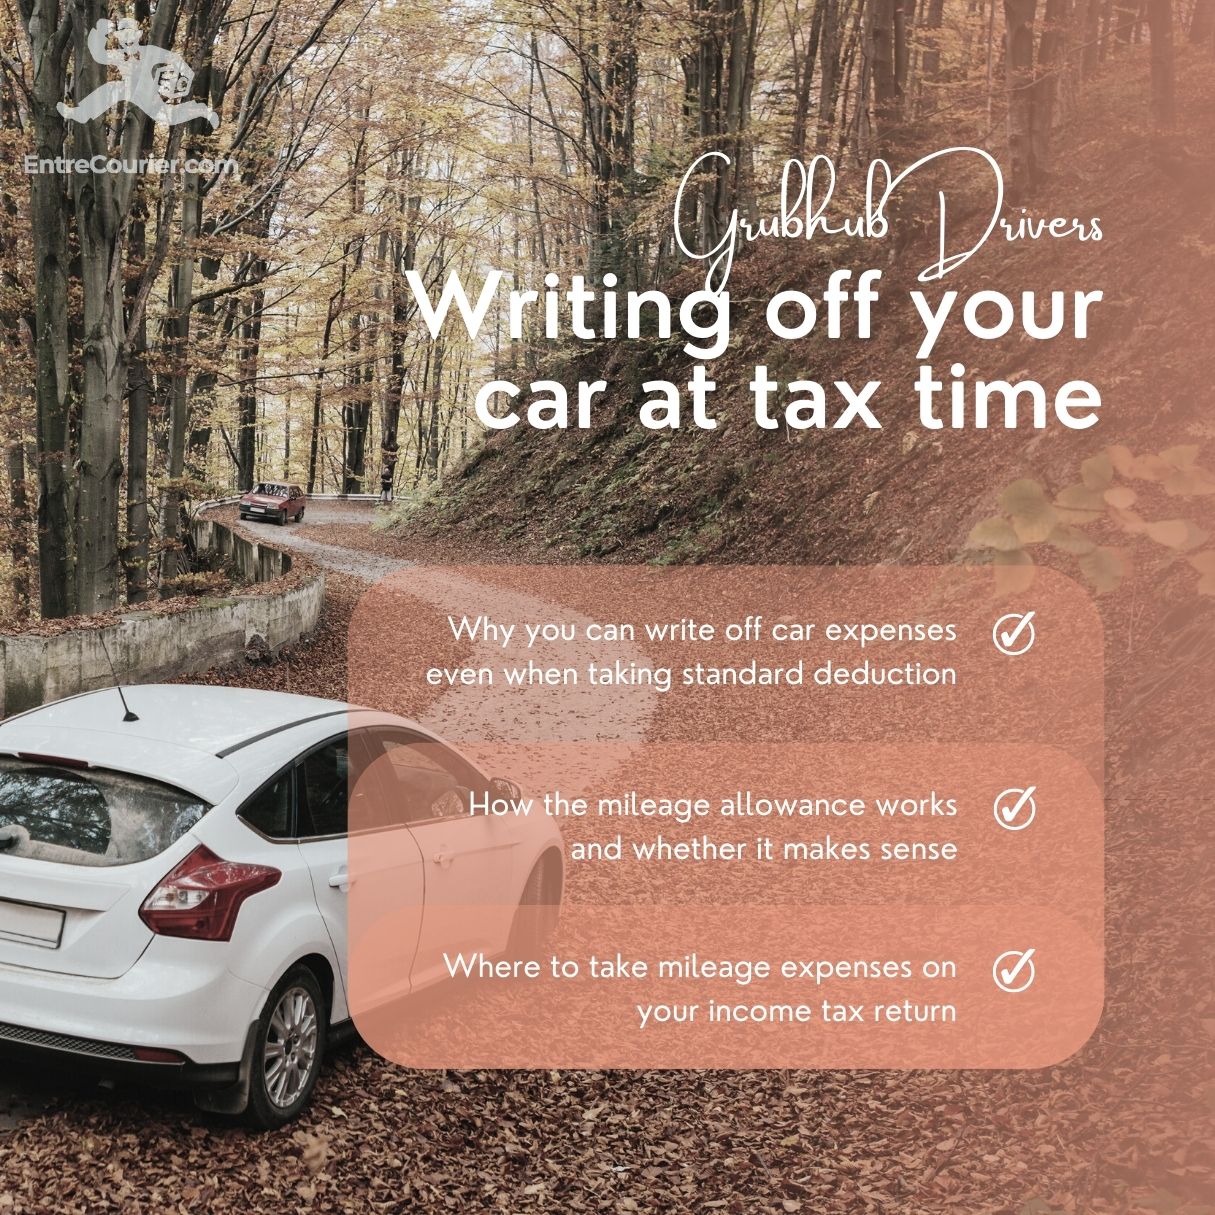 Grubhub drivers writing off your car at tax time: Image of a car driving on a rural road with captions including why you can write off car expenses with standard deduction, how the mileage allowance works, and where to take mileage expenses on your income tax return.